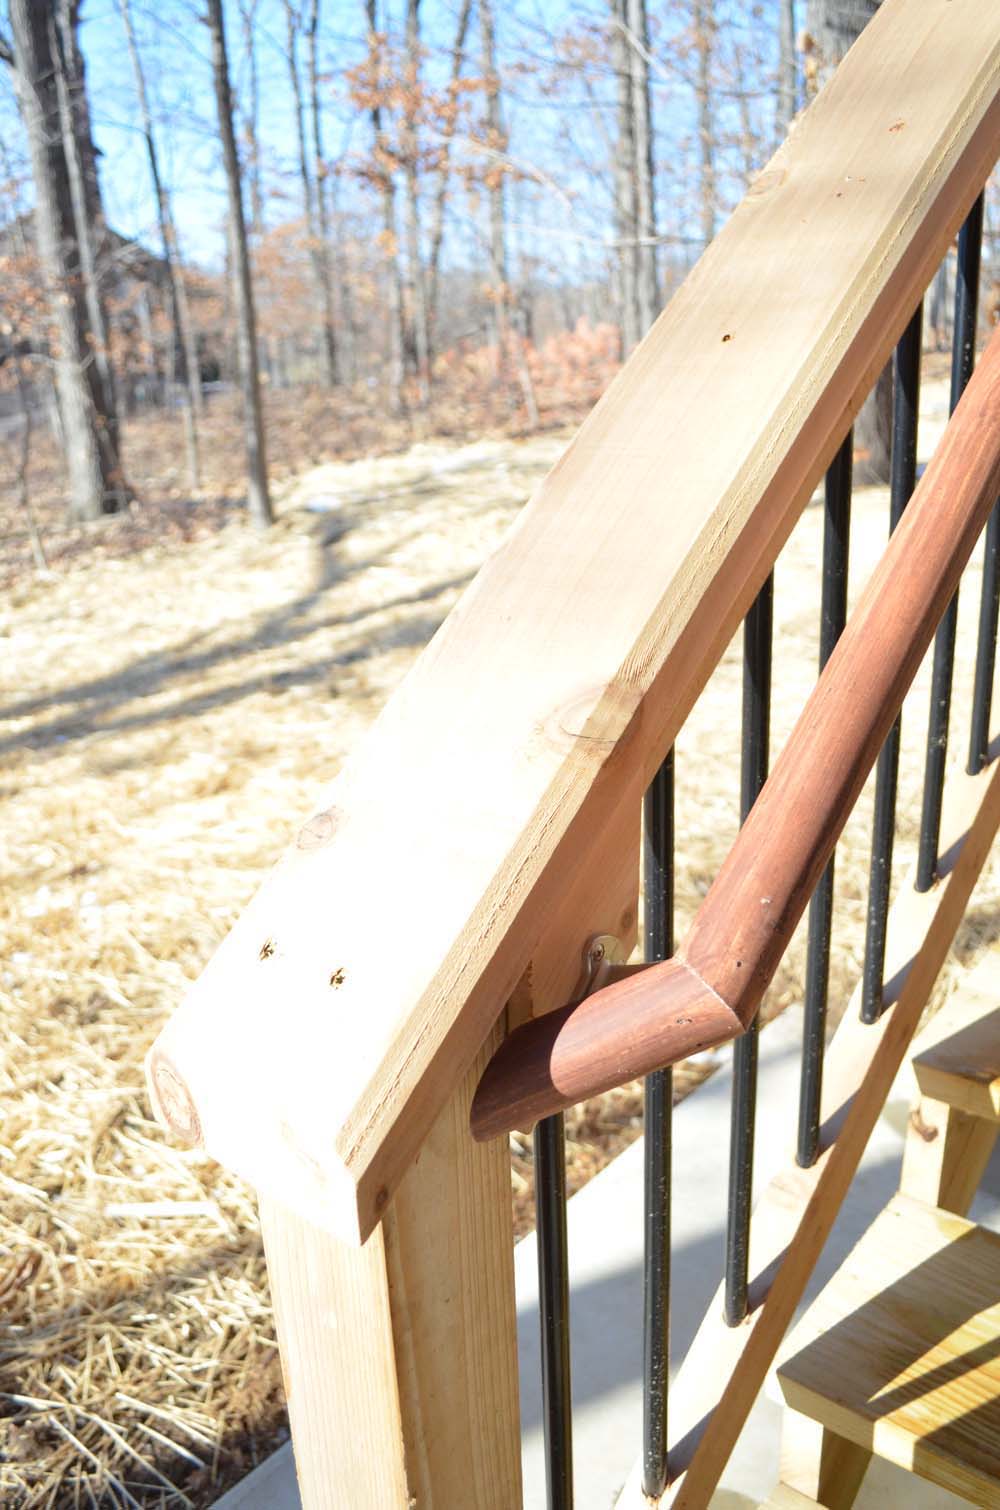 <p>Grippable handrail below 2x6 top rail on deck stairs.</p>